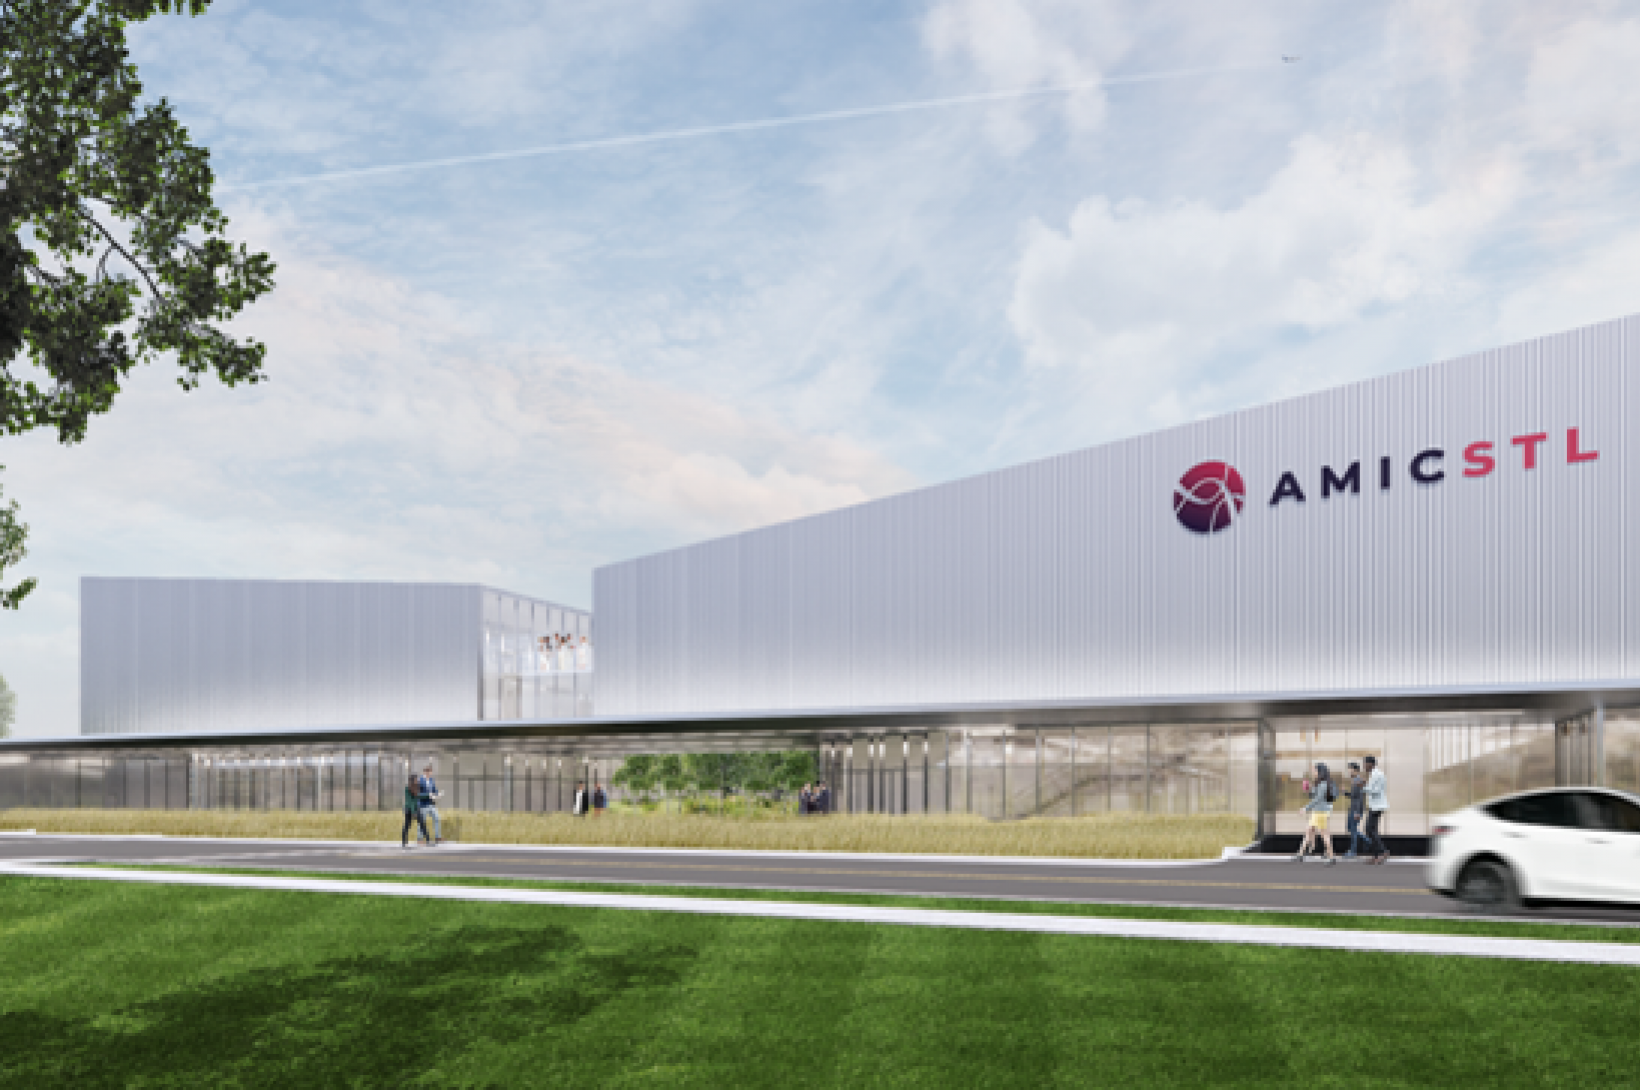 a rendering of the future AMICSTL facility in St. Louis, Missouri